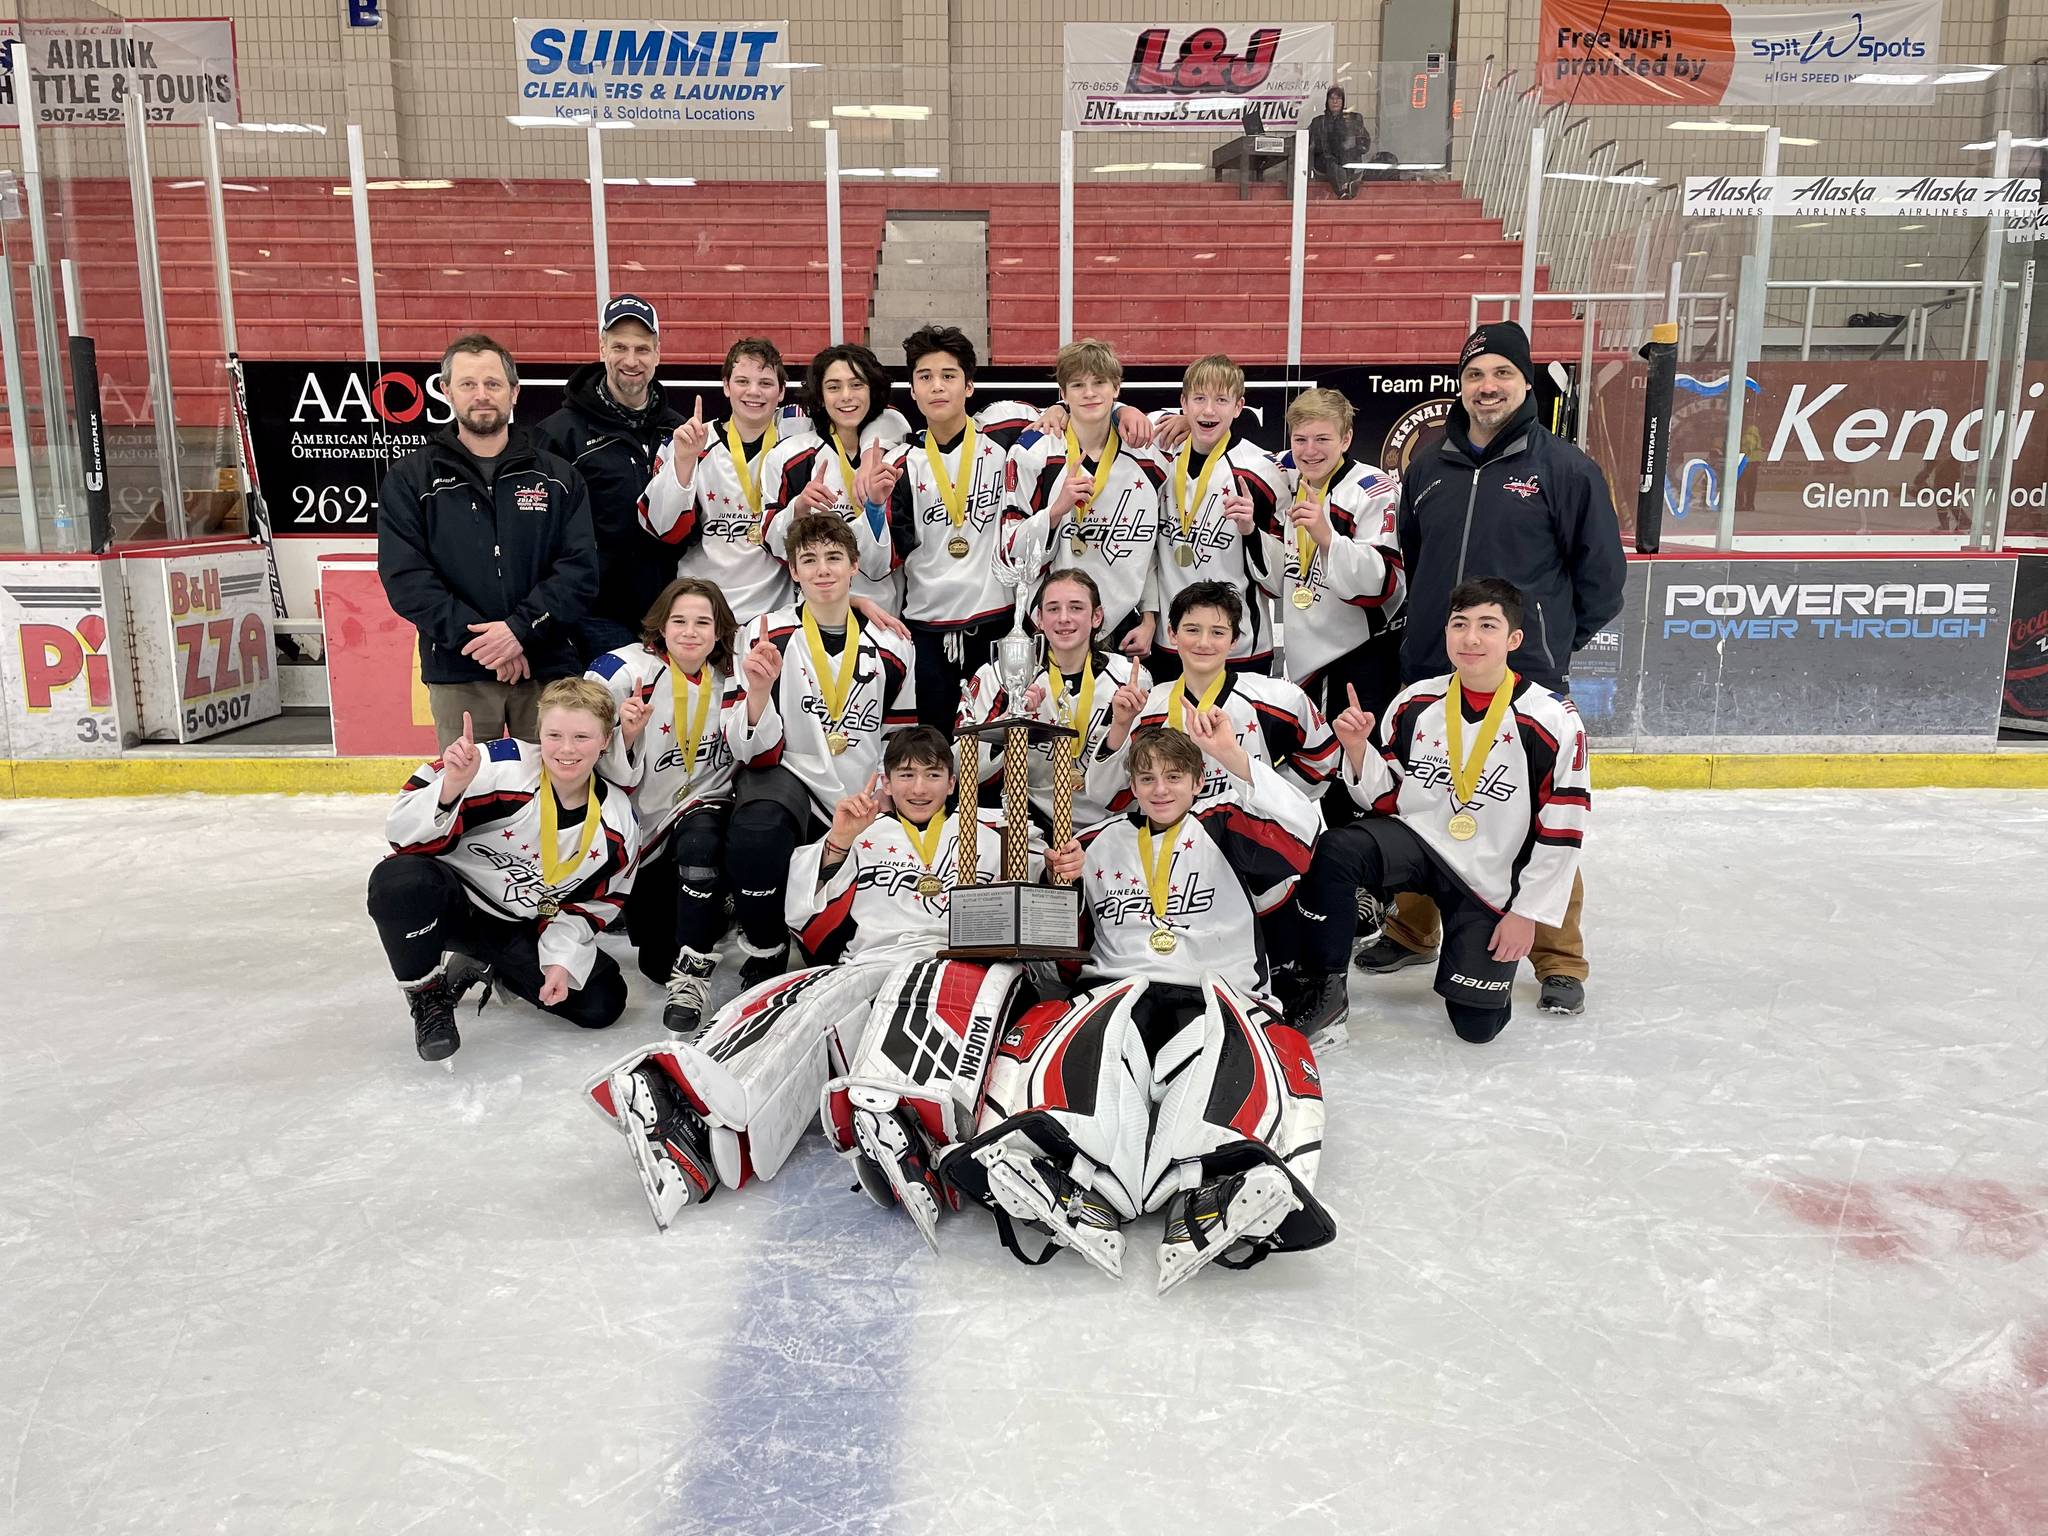 The Juneau Capitals swept six opposing 14U-Division A hockey teams en route to claiming a state title in Kenai over the March 19-21 weekend. (Courtesy Photo / Charity Platt)